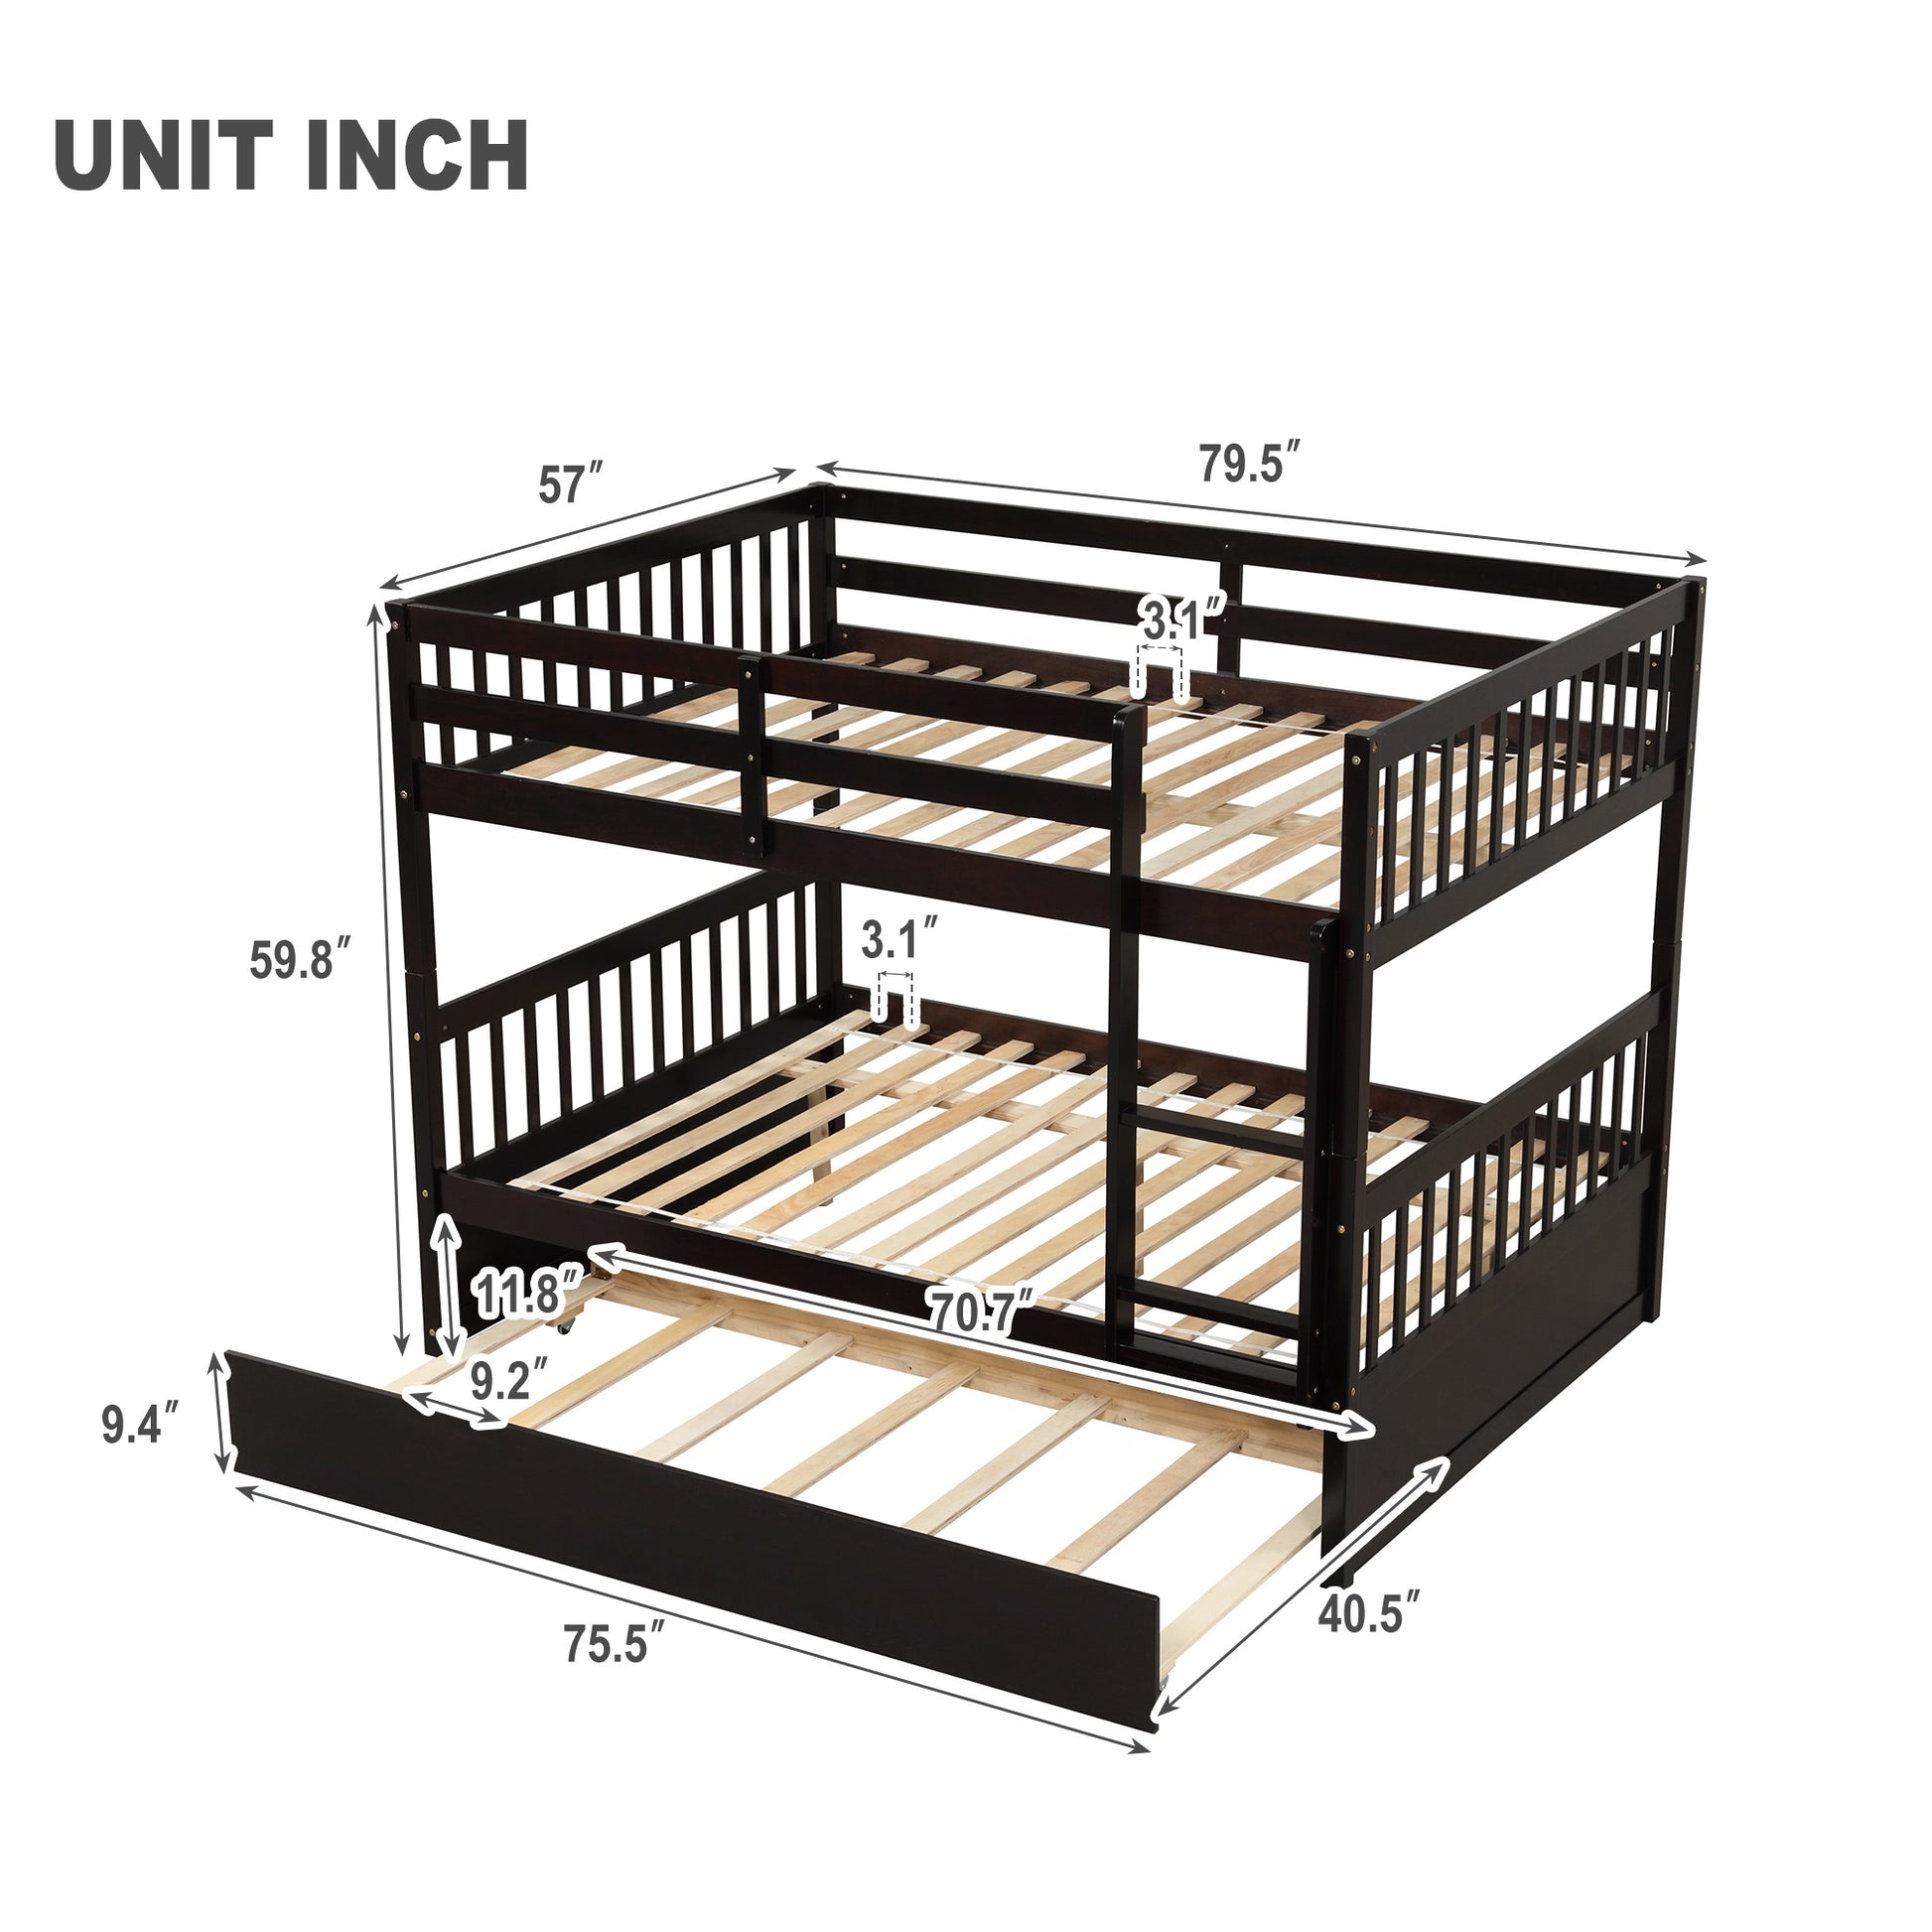 Inspirit Full over Full Convertible Bunk Bed with Trundle - Espresso